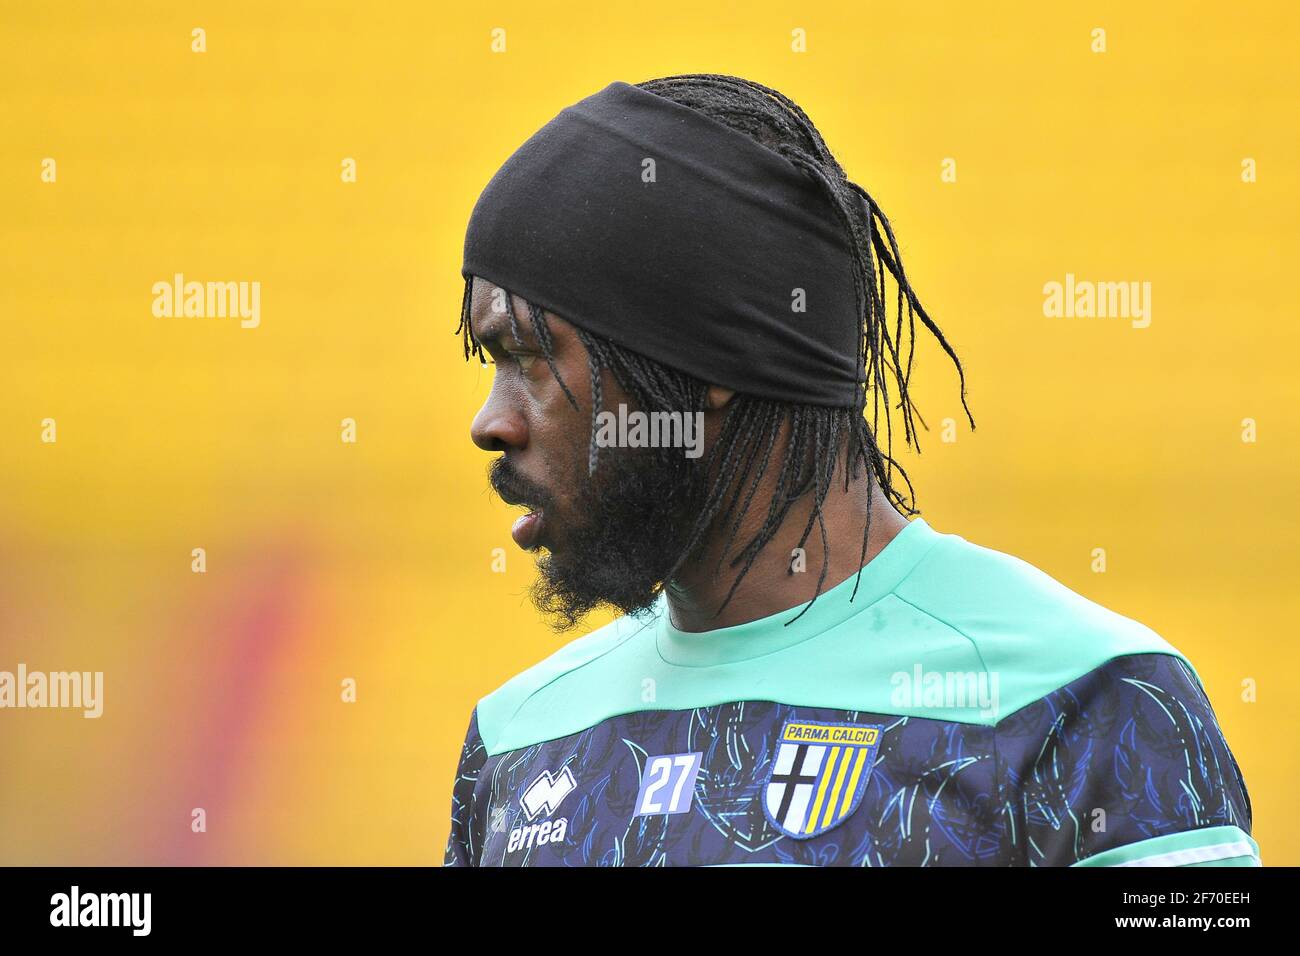 Benevento, Italy, April 03, 2021. Gervinho player of Parma, during the match of the Italian football league Serie A between Benevento vs Parma final result 2-2, match played at the Ciro Vigorito stadium in Benevento. Credit: Vincenzo Izzo/Alamy Live News Stock Photo